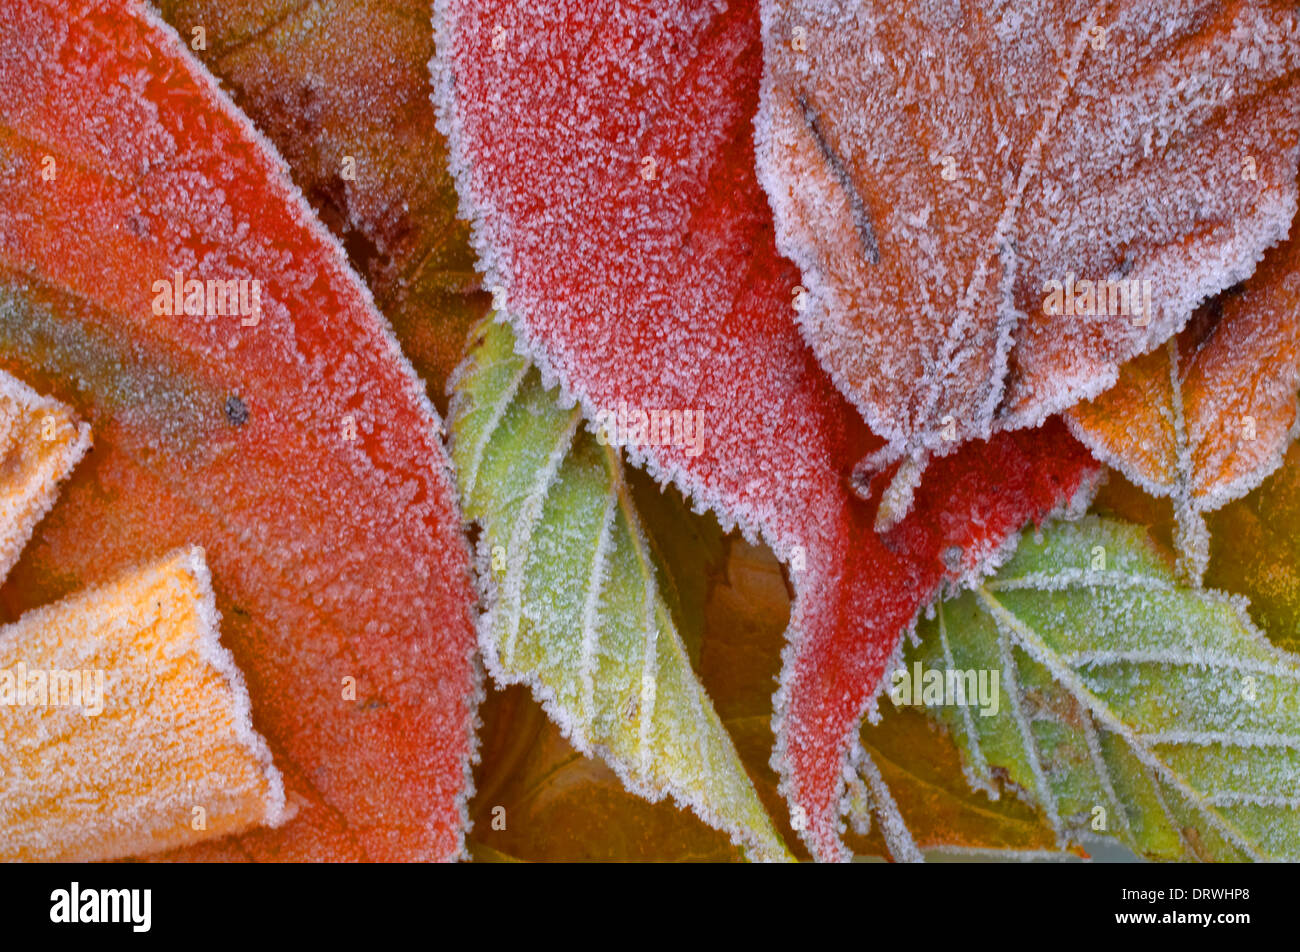 Abstract image of Autumnal leaves with a covering of frost Stock Photo